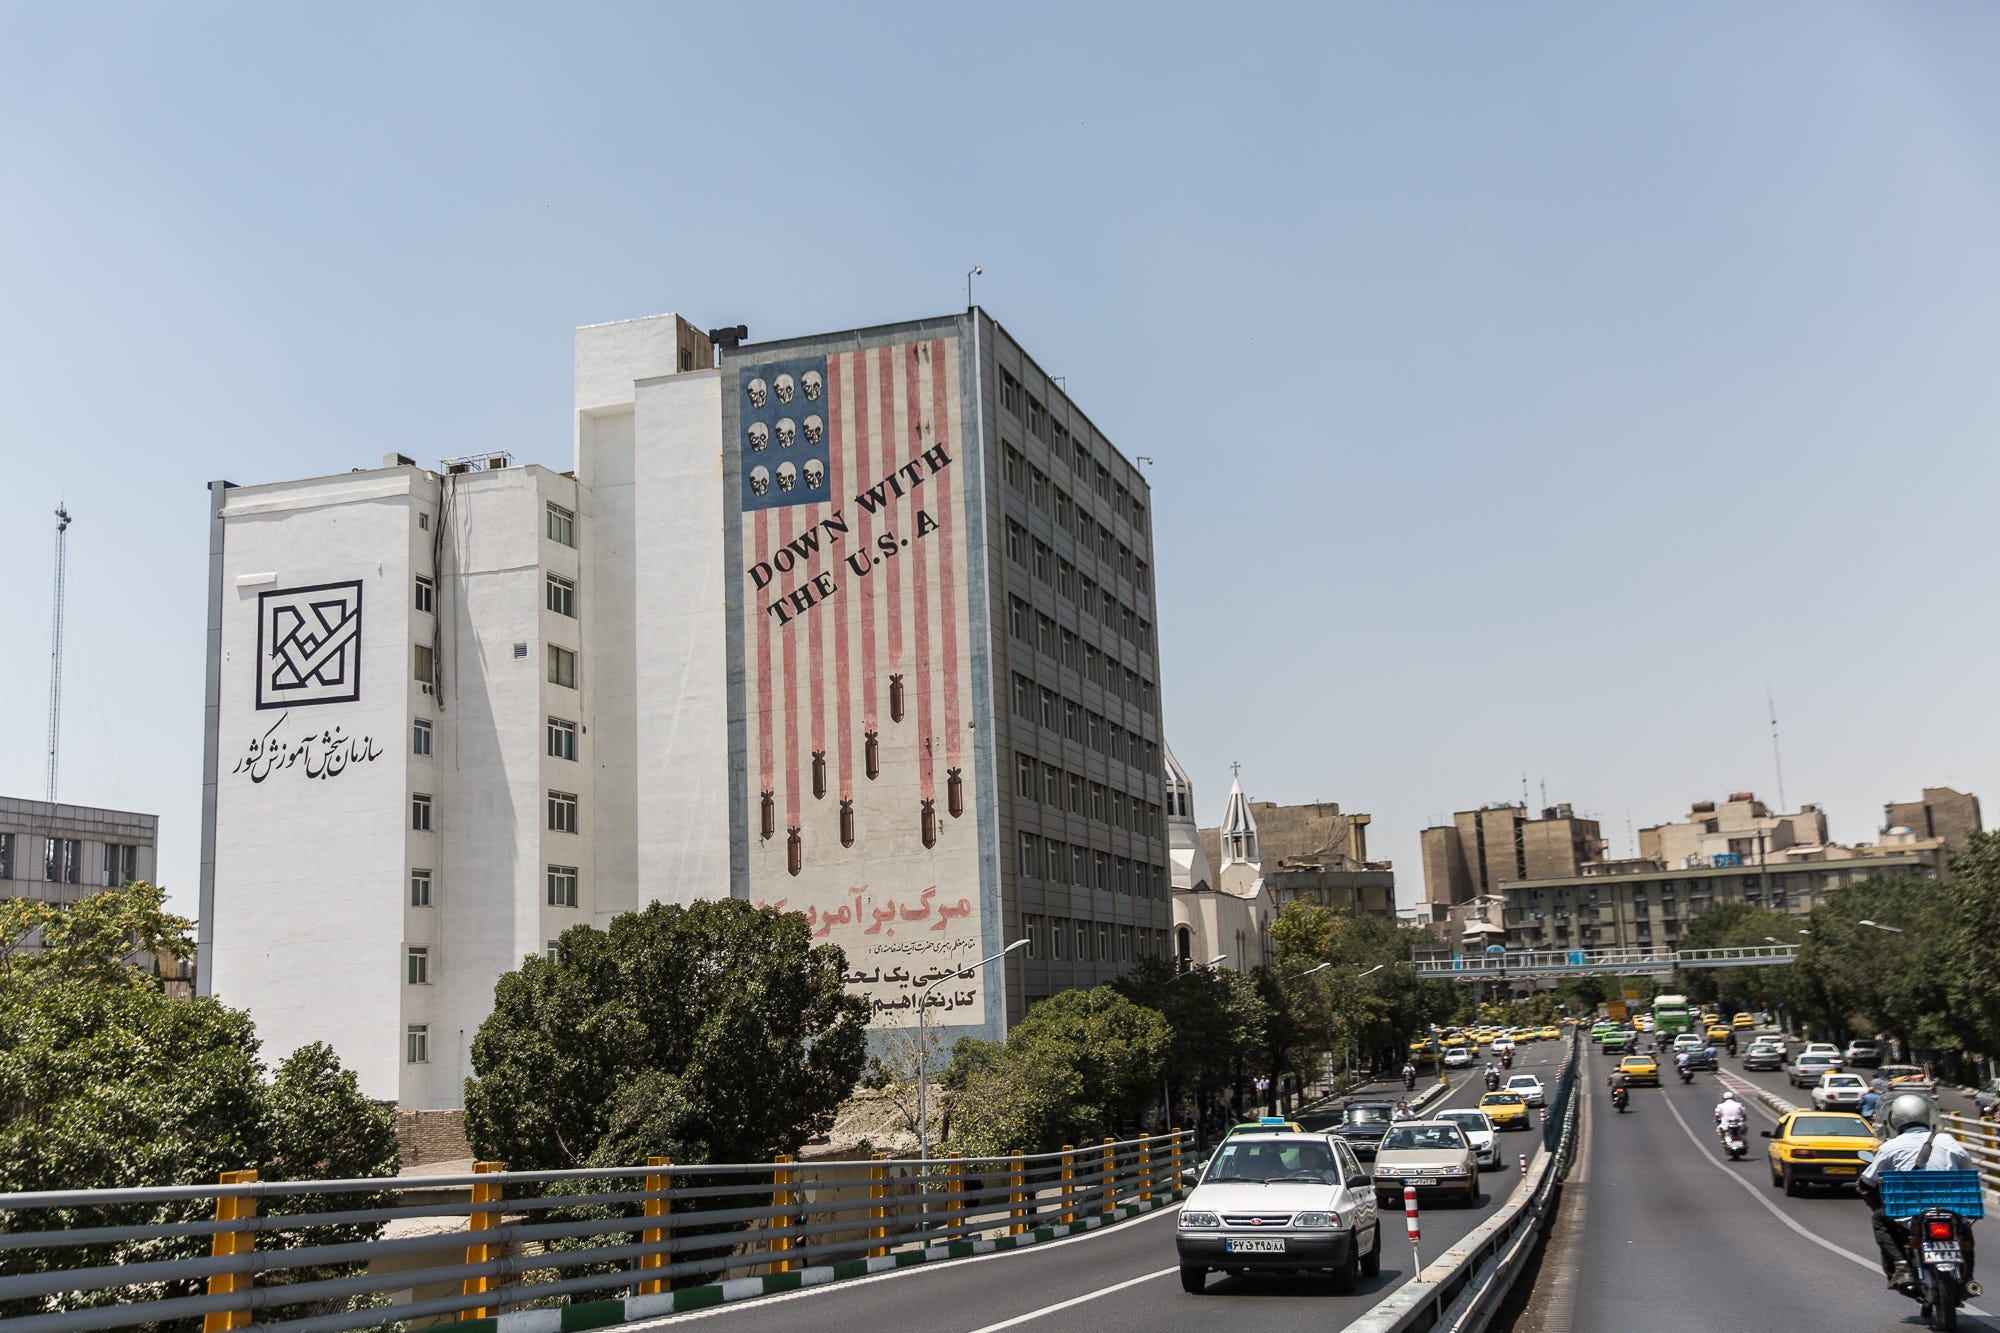 A "Down with the USA" mural dominates central Tehran.